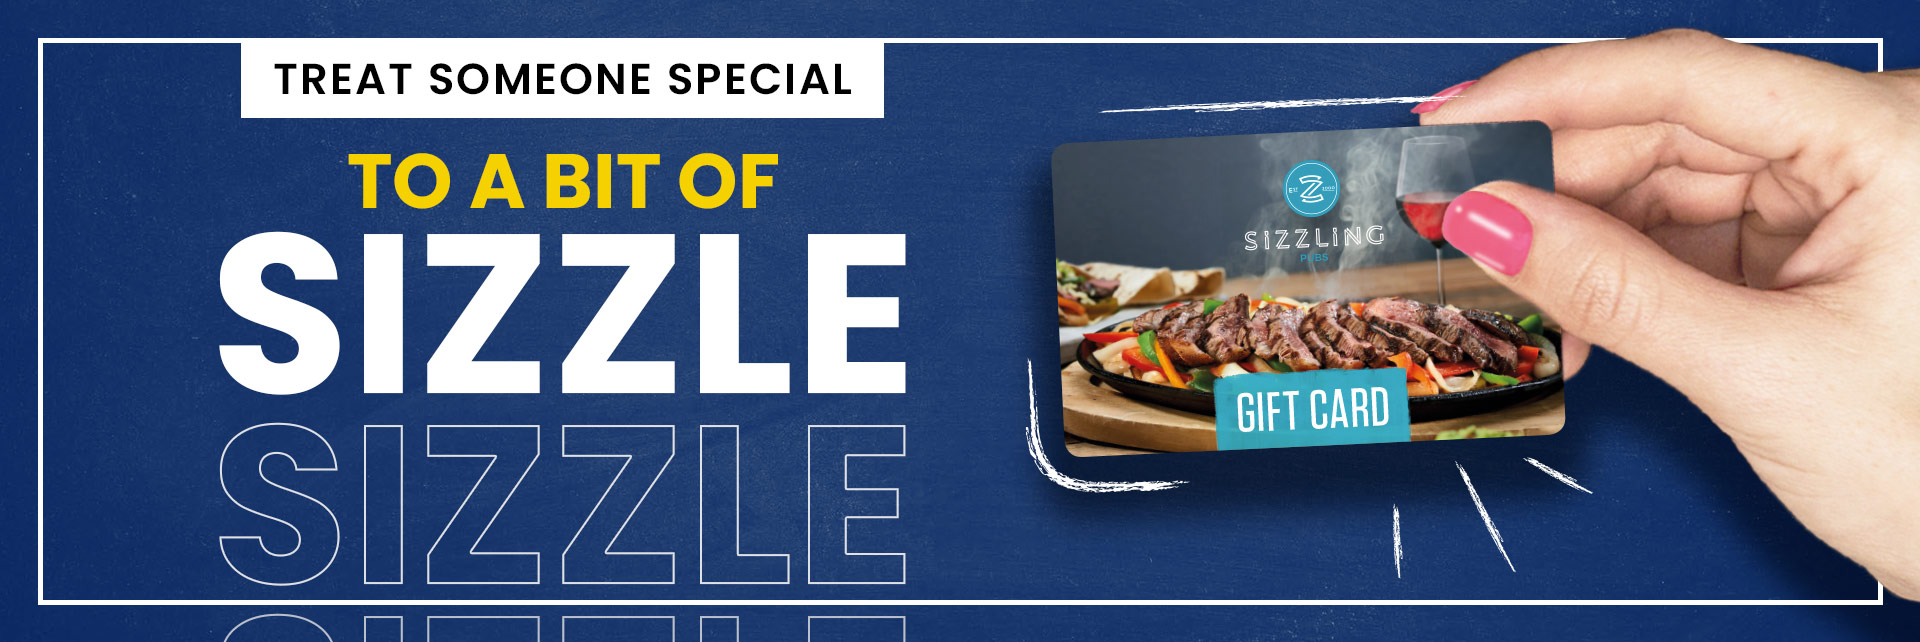 Sizzling Pubs Gift Card at The Potter's Wheel in Newcastle-Under-Lyme